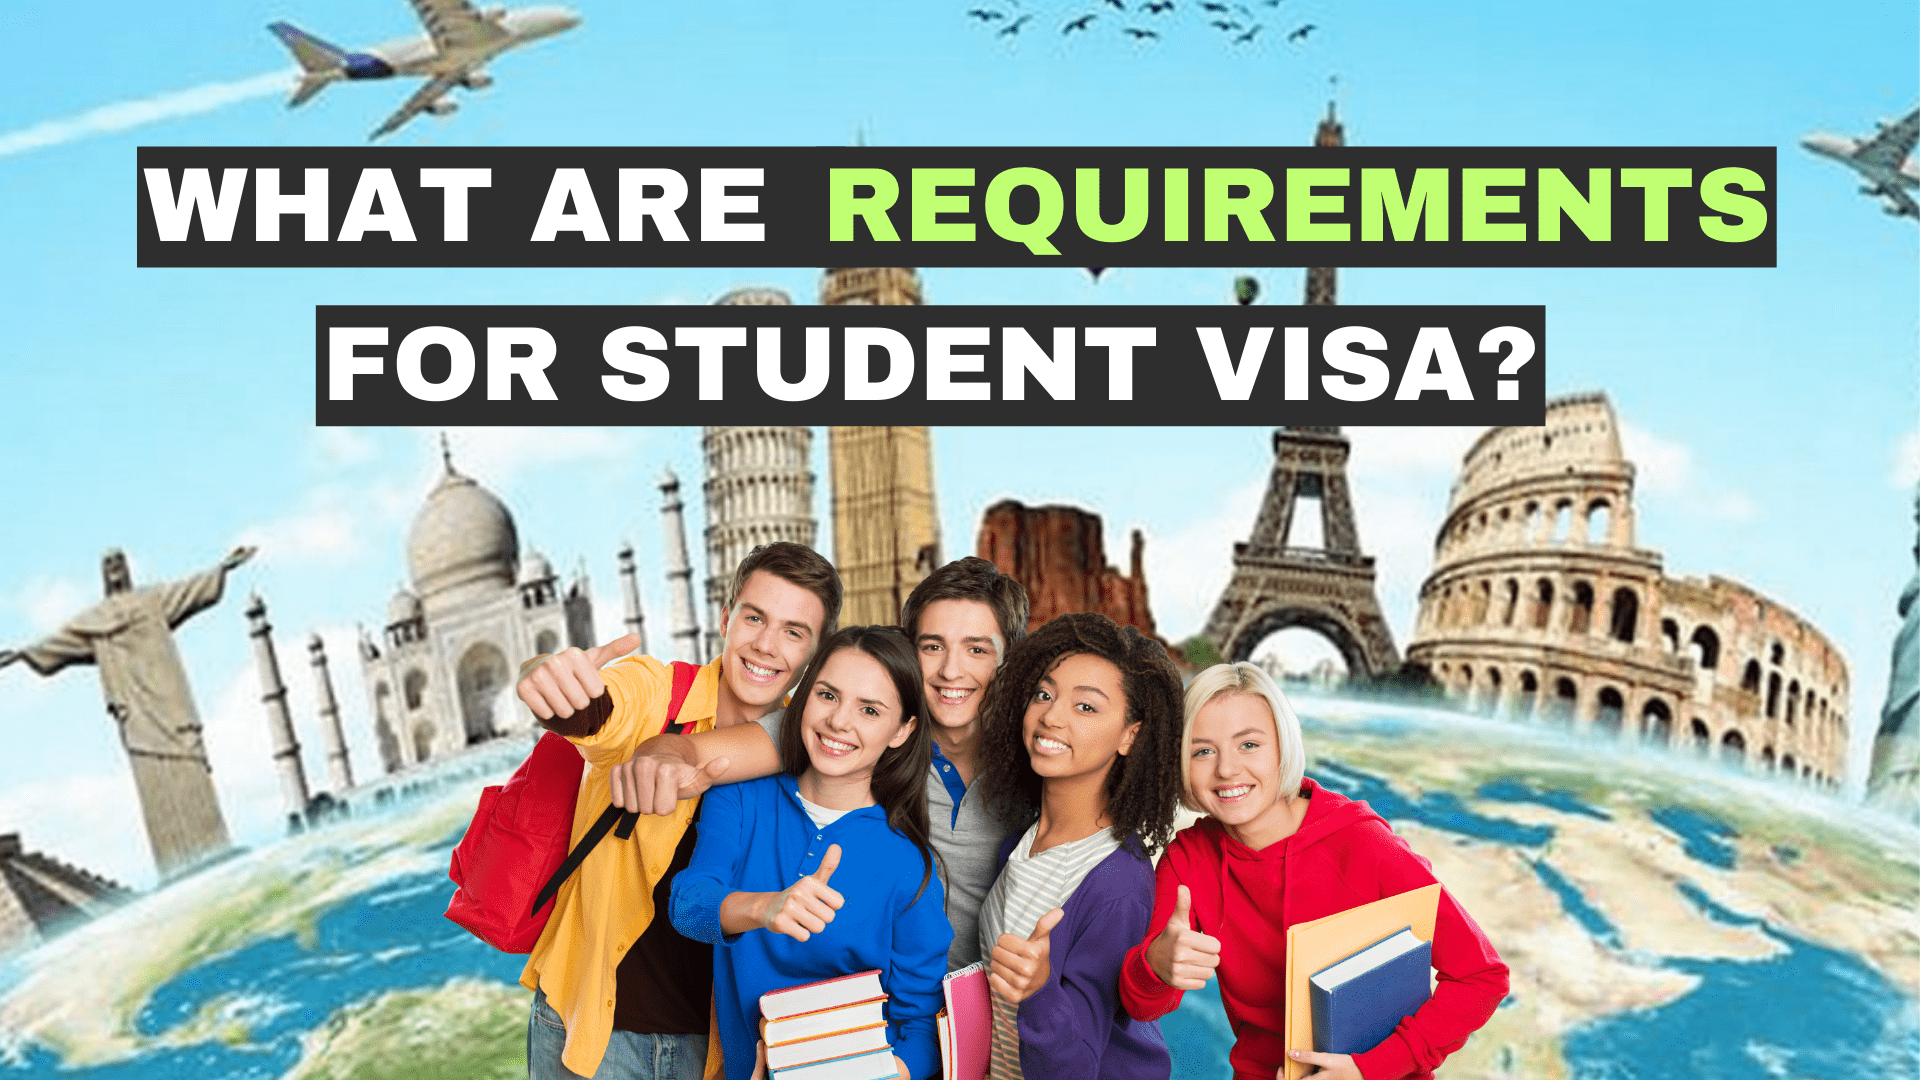 Requirements for Student Visa